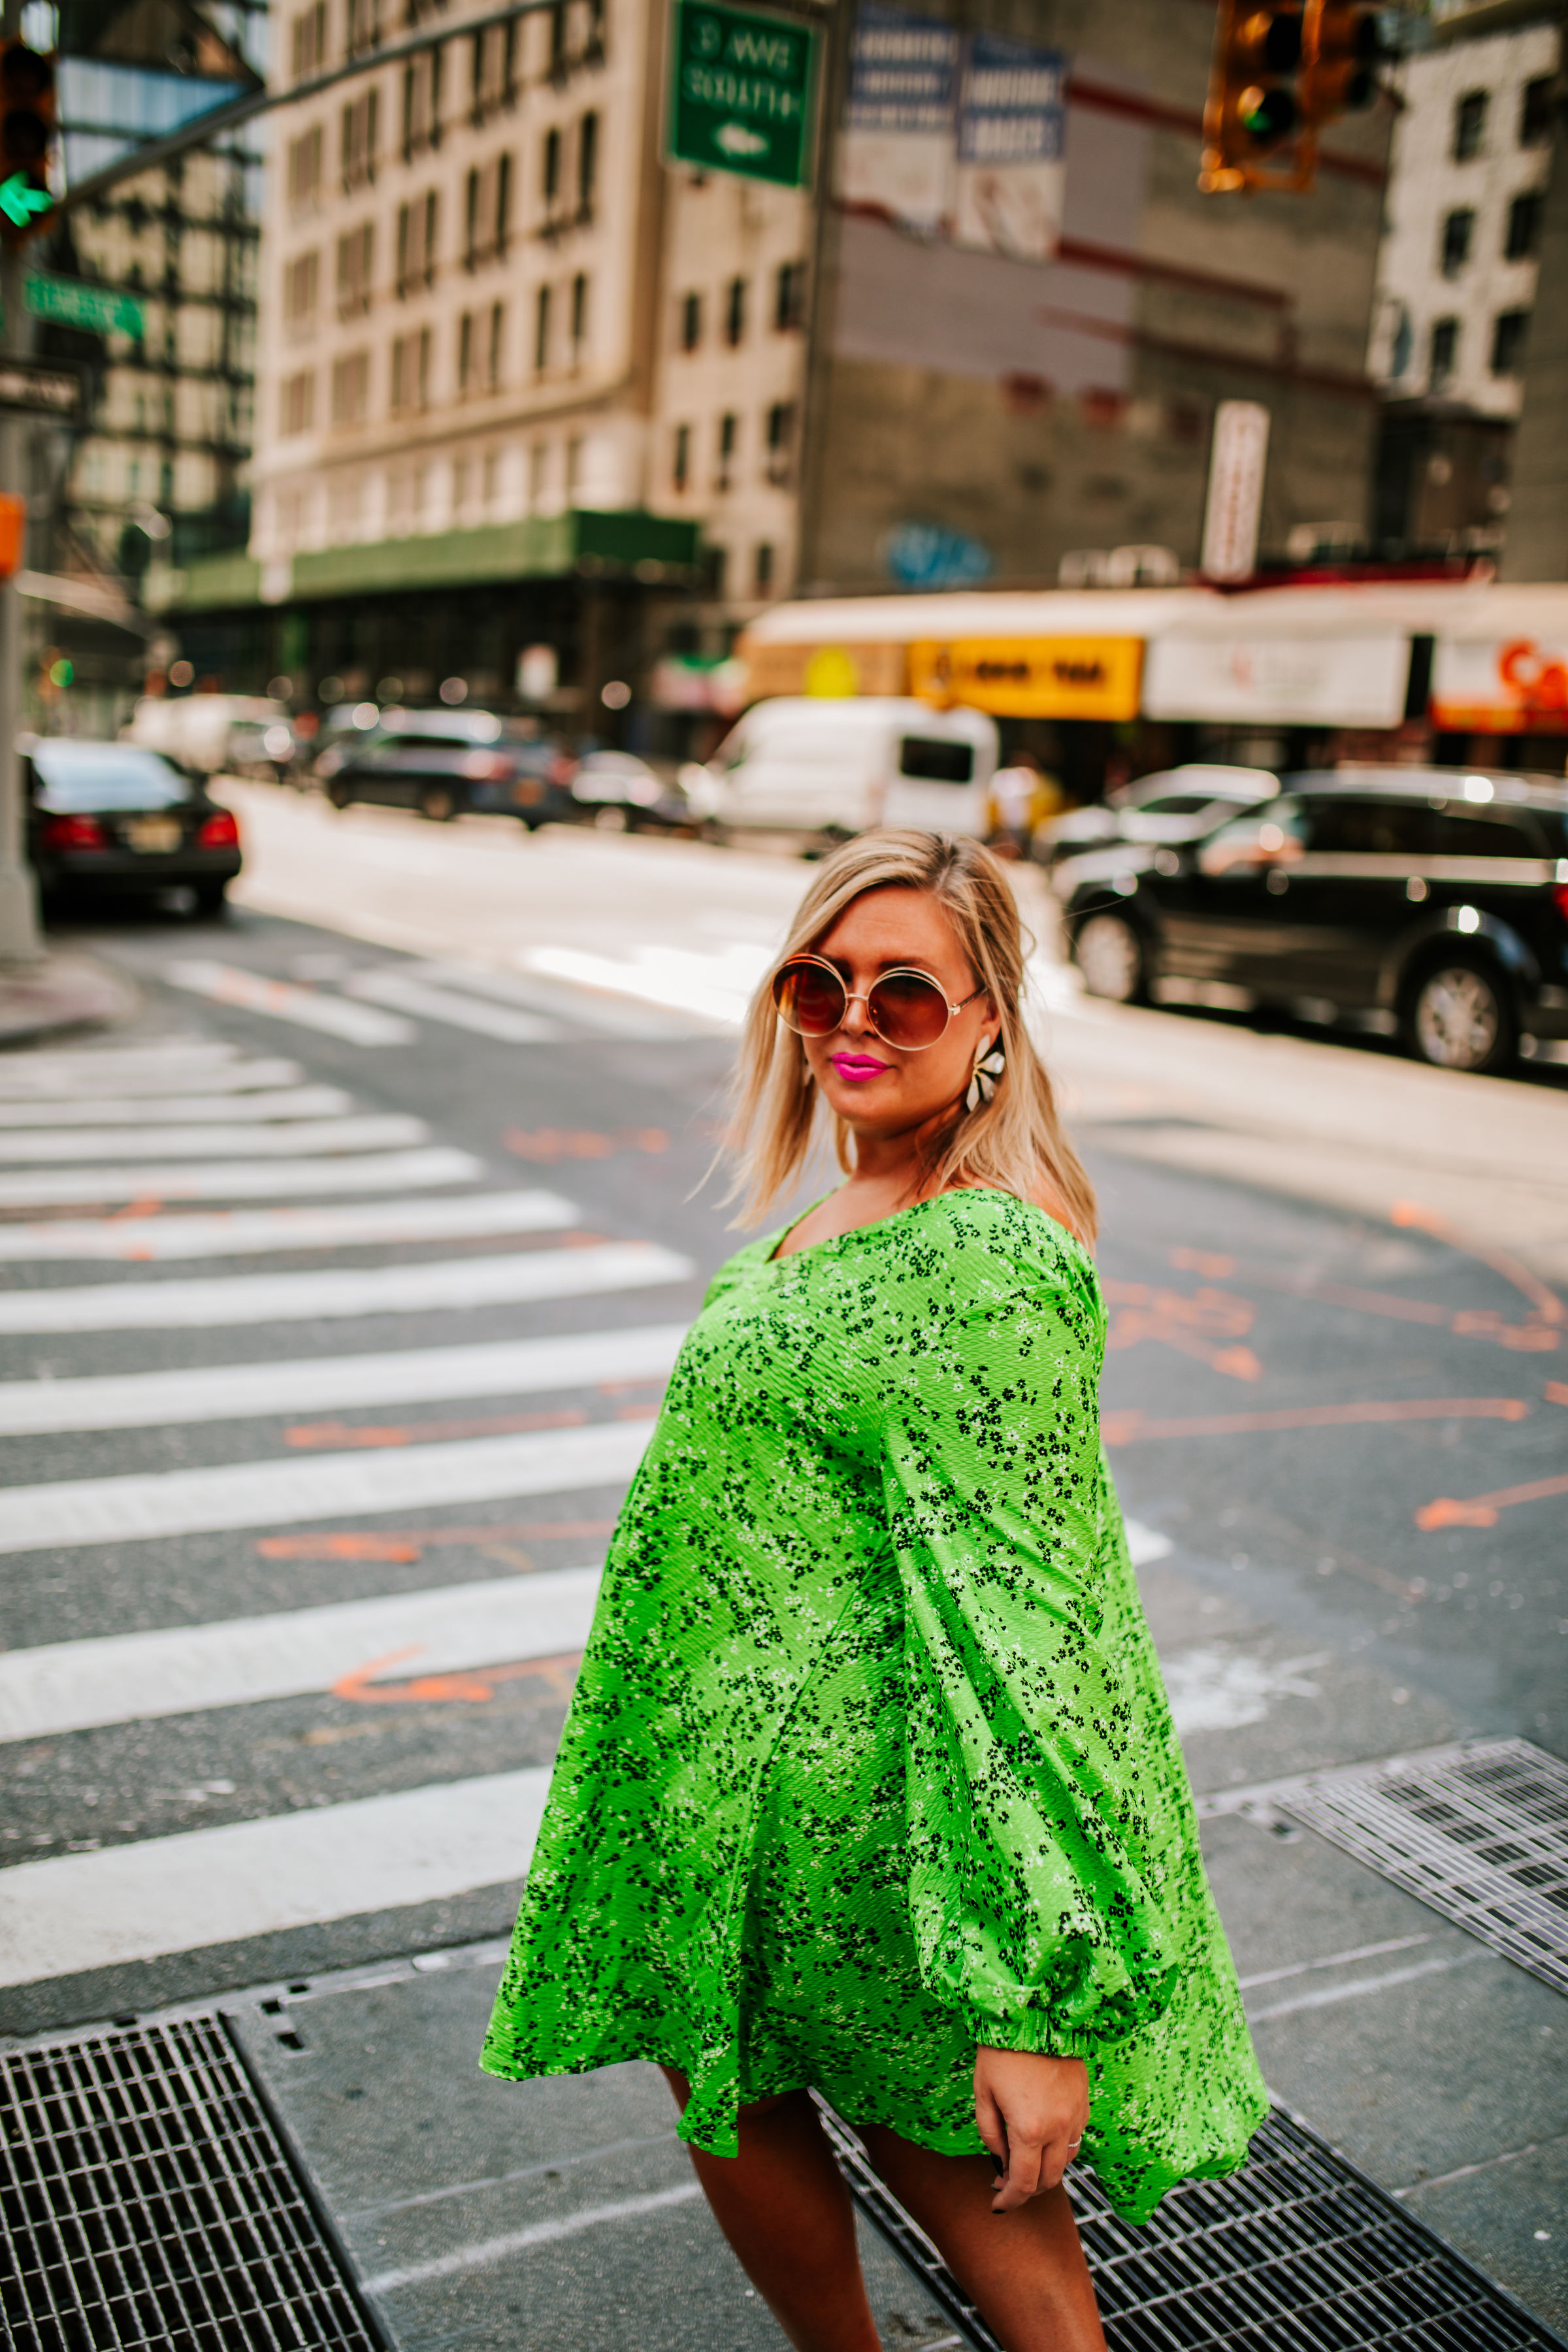 NYFW DAY 1 // what I wore + where I went — House of Dorough